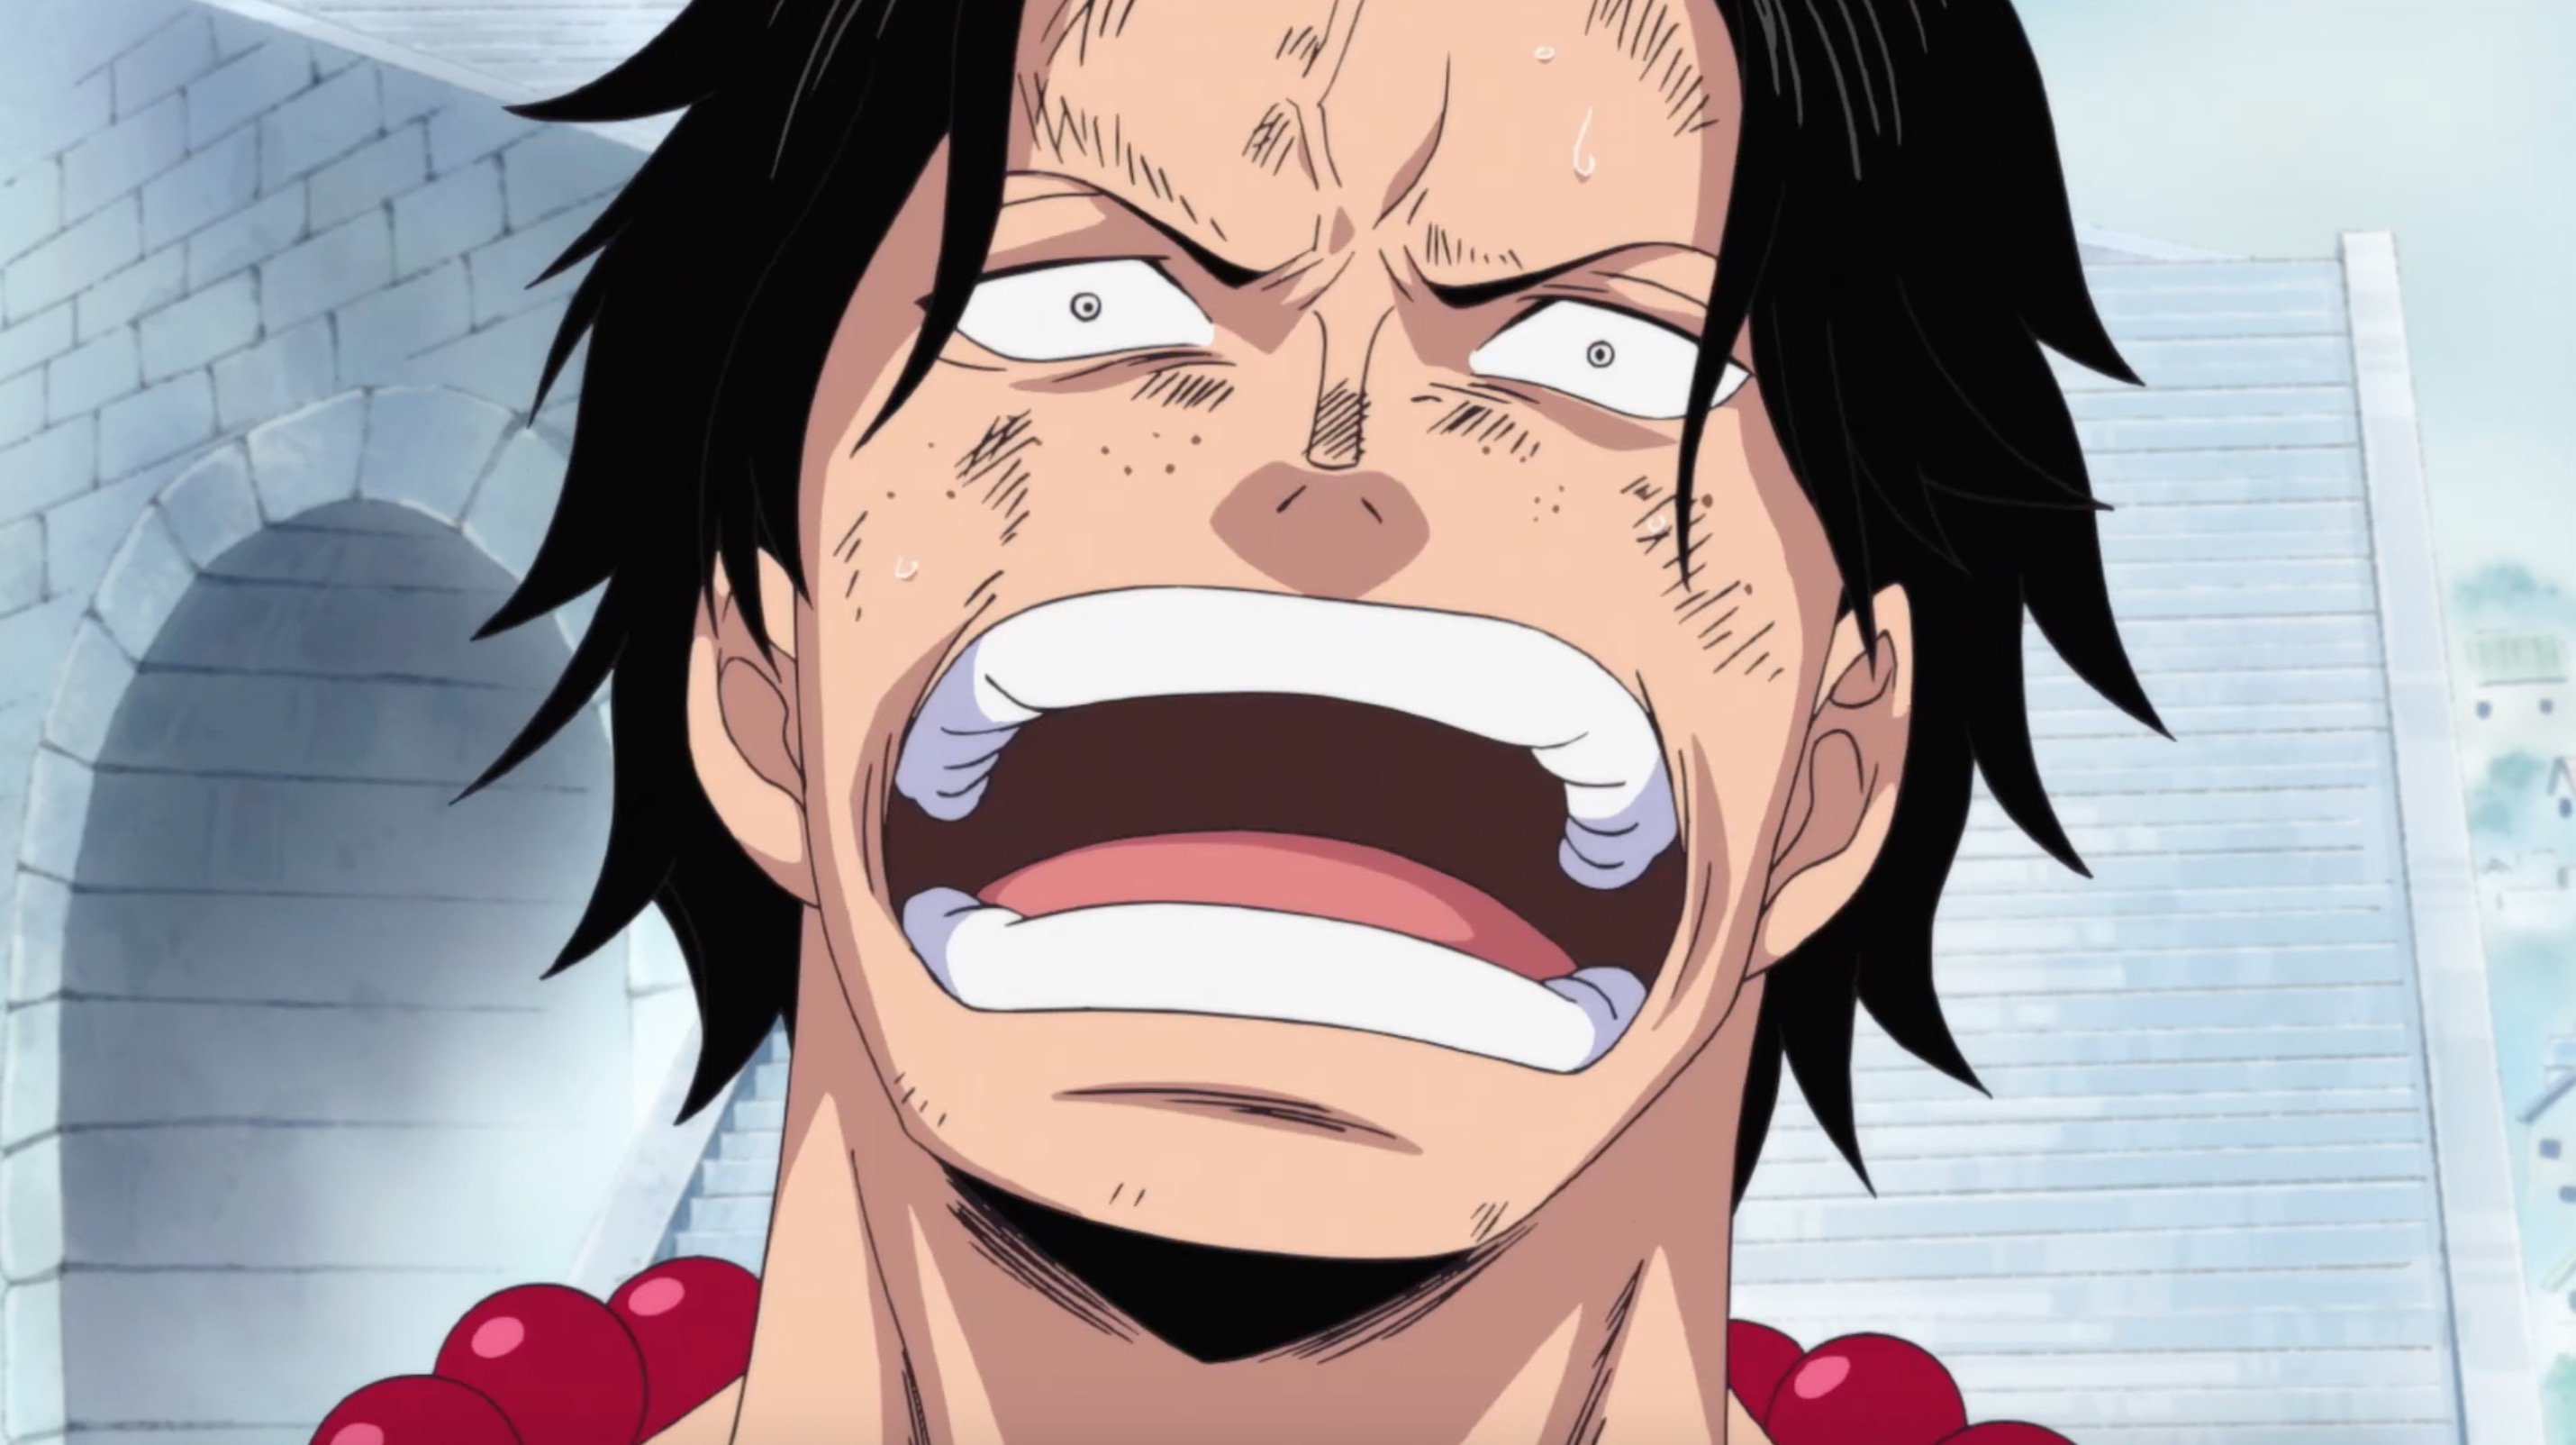 Funimation Watch The Newest Dubbed Episodes Eps 457 468 Of Onepiece Here On Funimation Marineford T Co 2pdvfkn8te T Co Vgdipkbujb Twitter